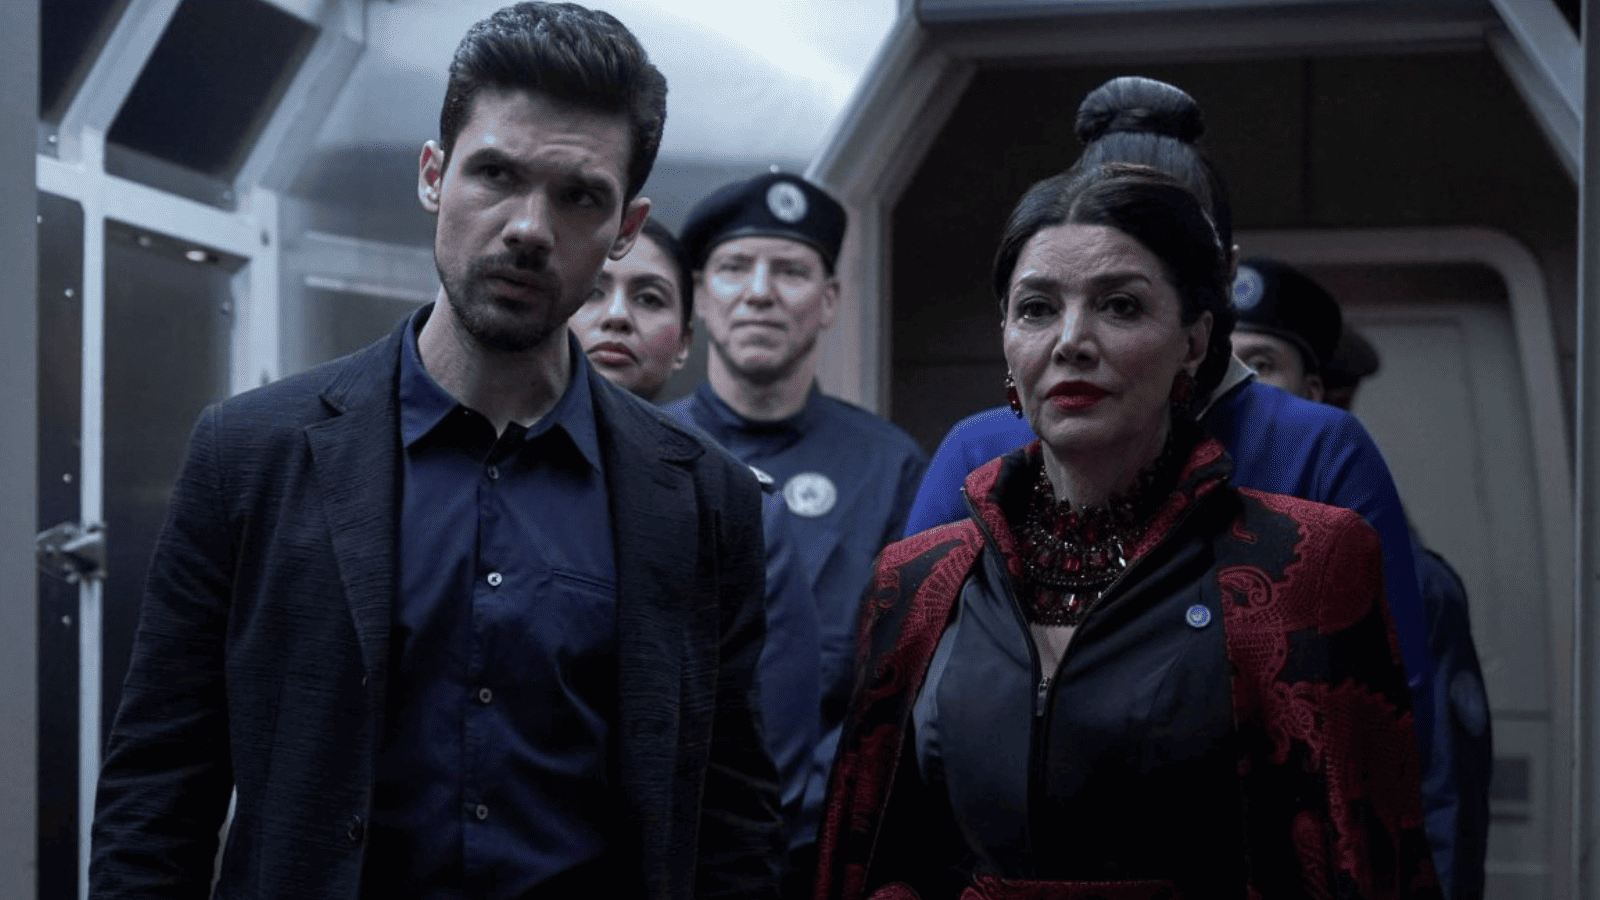 Scene from The Expanse